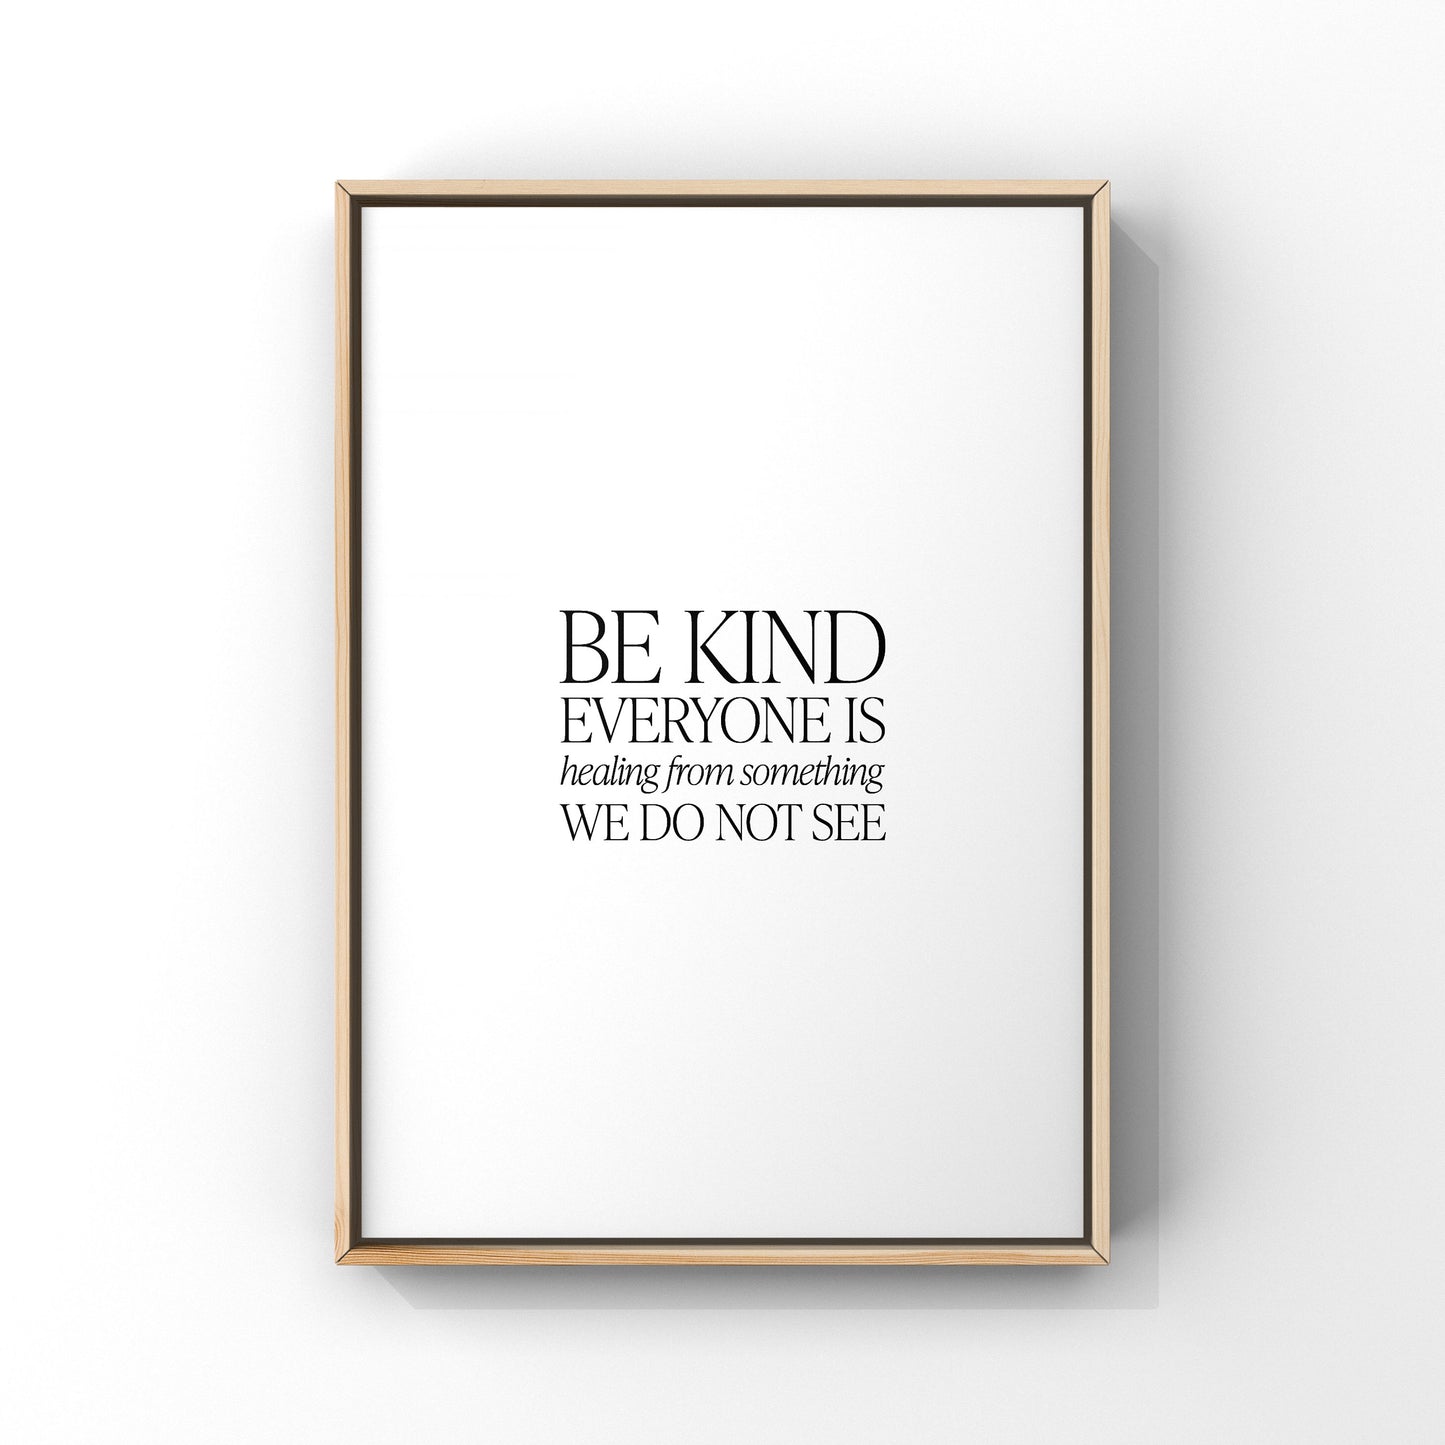 Be kind everyone is healing from something we do not see,Inspirational quote print,Kindness quote,Mental health,Office decor,Motivational